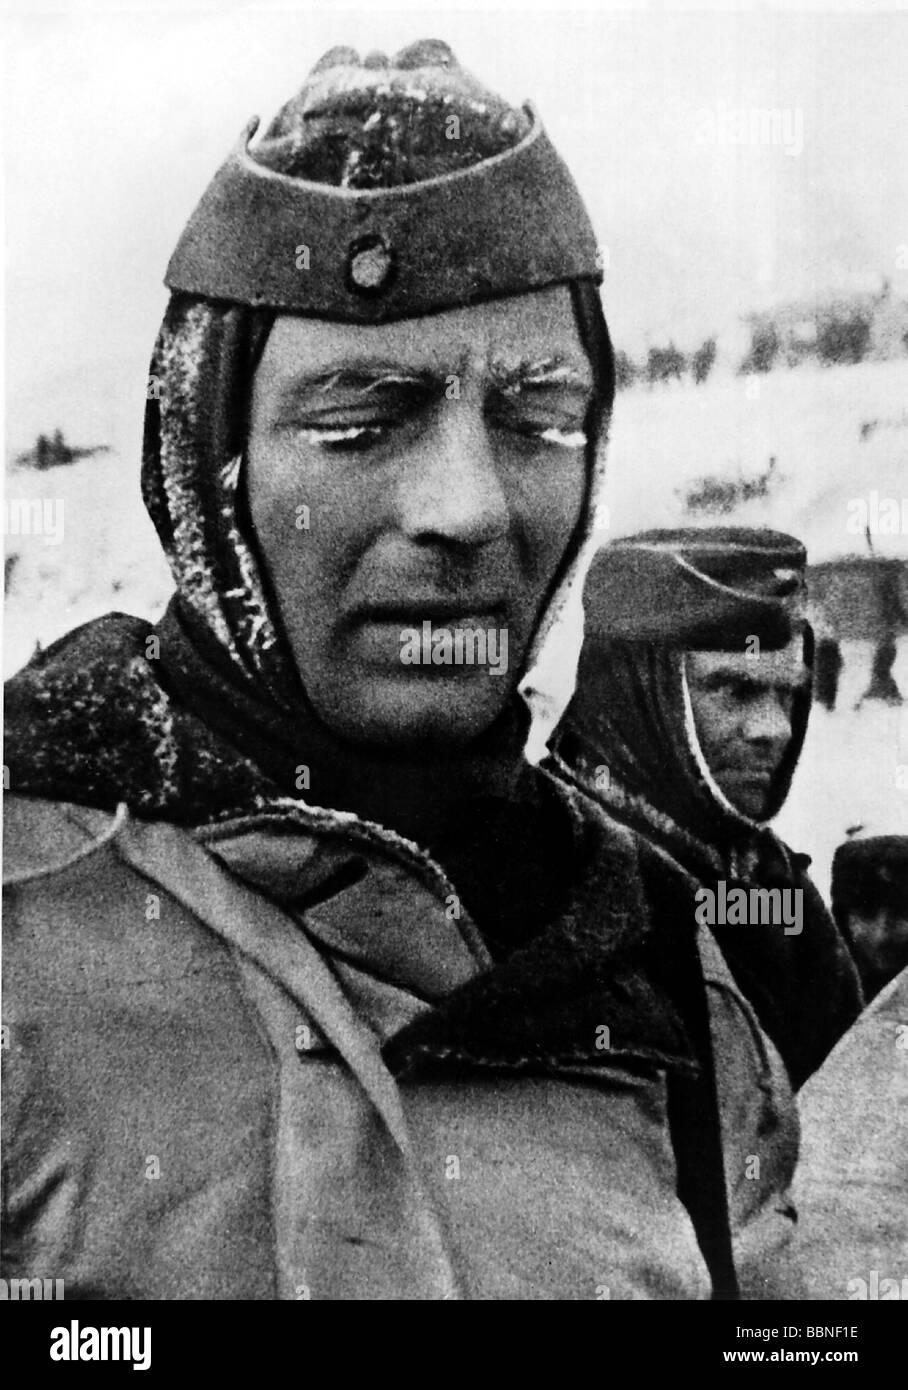 events, Second World War / WWII, Russia, Stalingrad 1942 / 1943, German soldier after the capitulation, early February 1943, winter, ice, coldness, iciness, Eastern Front, prisoners of war, prisoner, Wehrmacht, Soviet Union, USSR, 20th century, historic, historical, defeat, soldiers, 1940s, people, Stock Photo